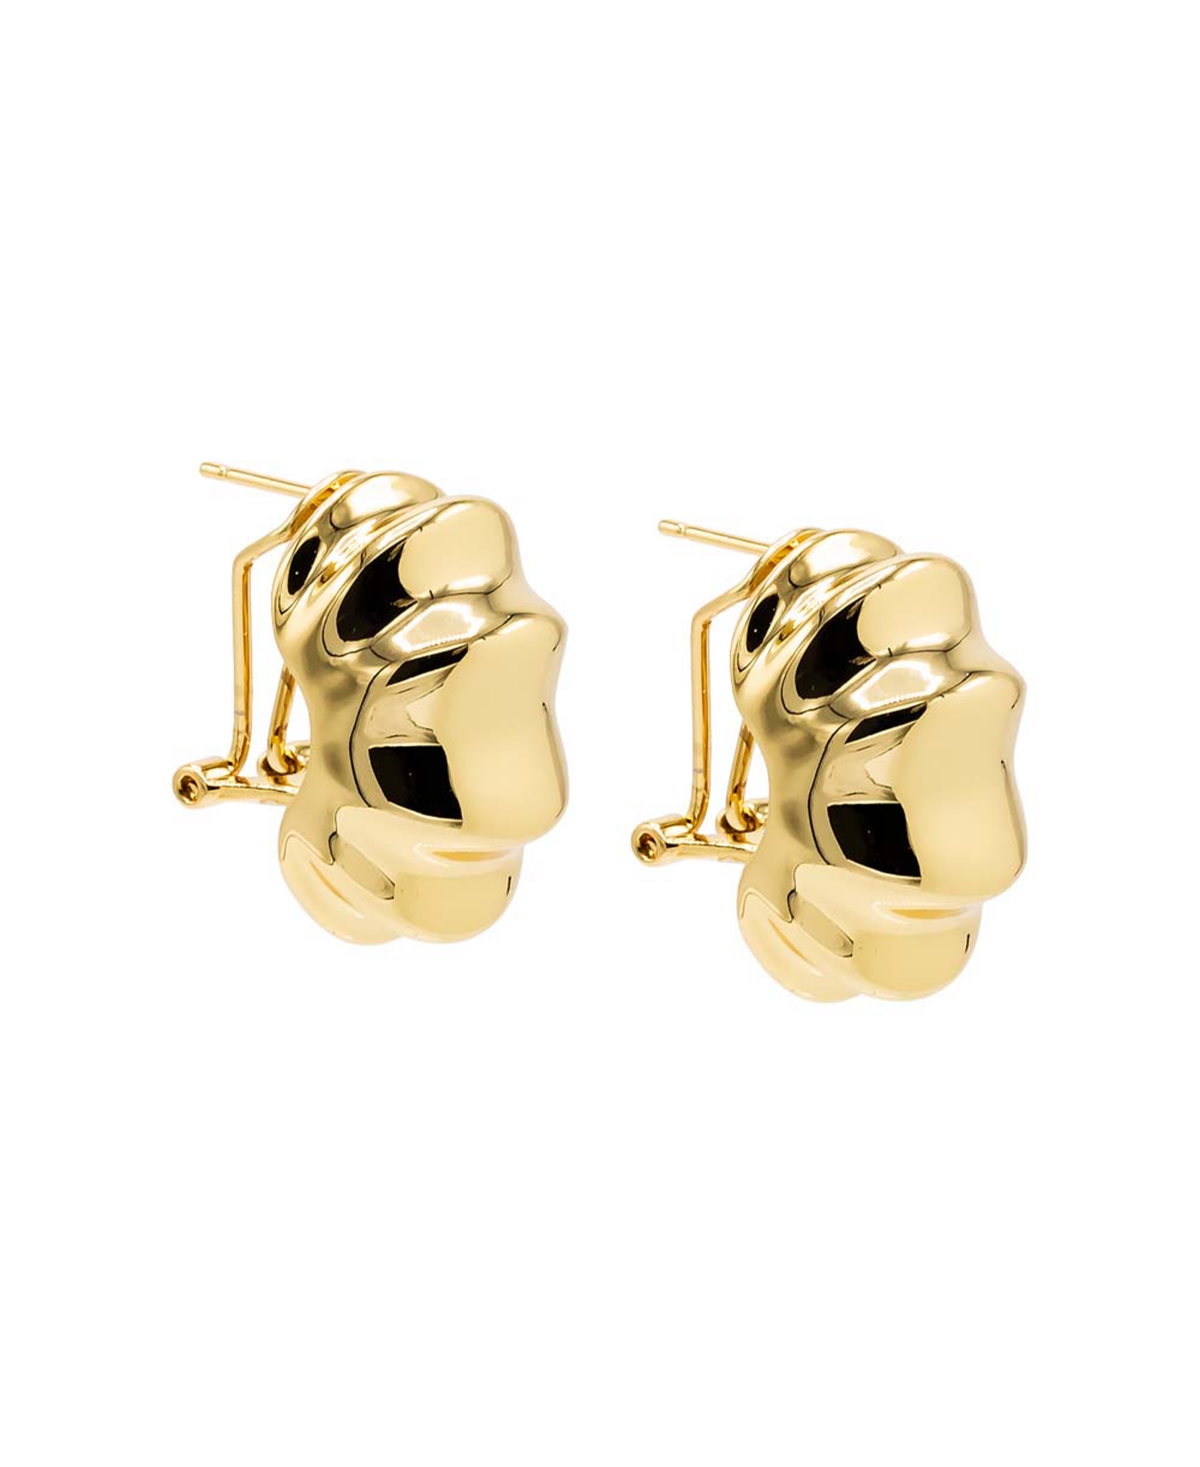 By Adina Eden Solid Indented On The Ear Stud Earring In Gold